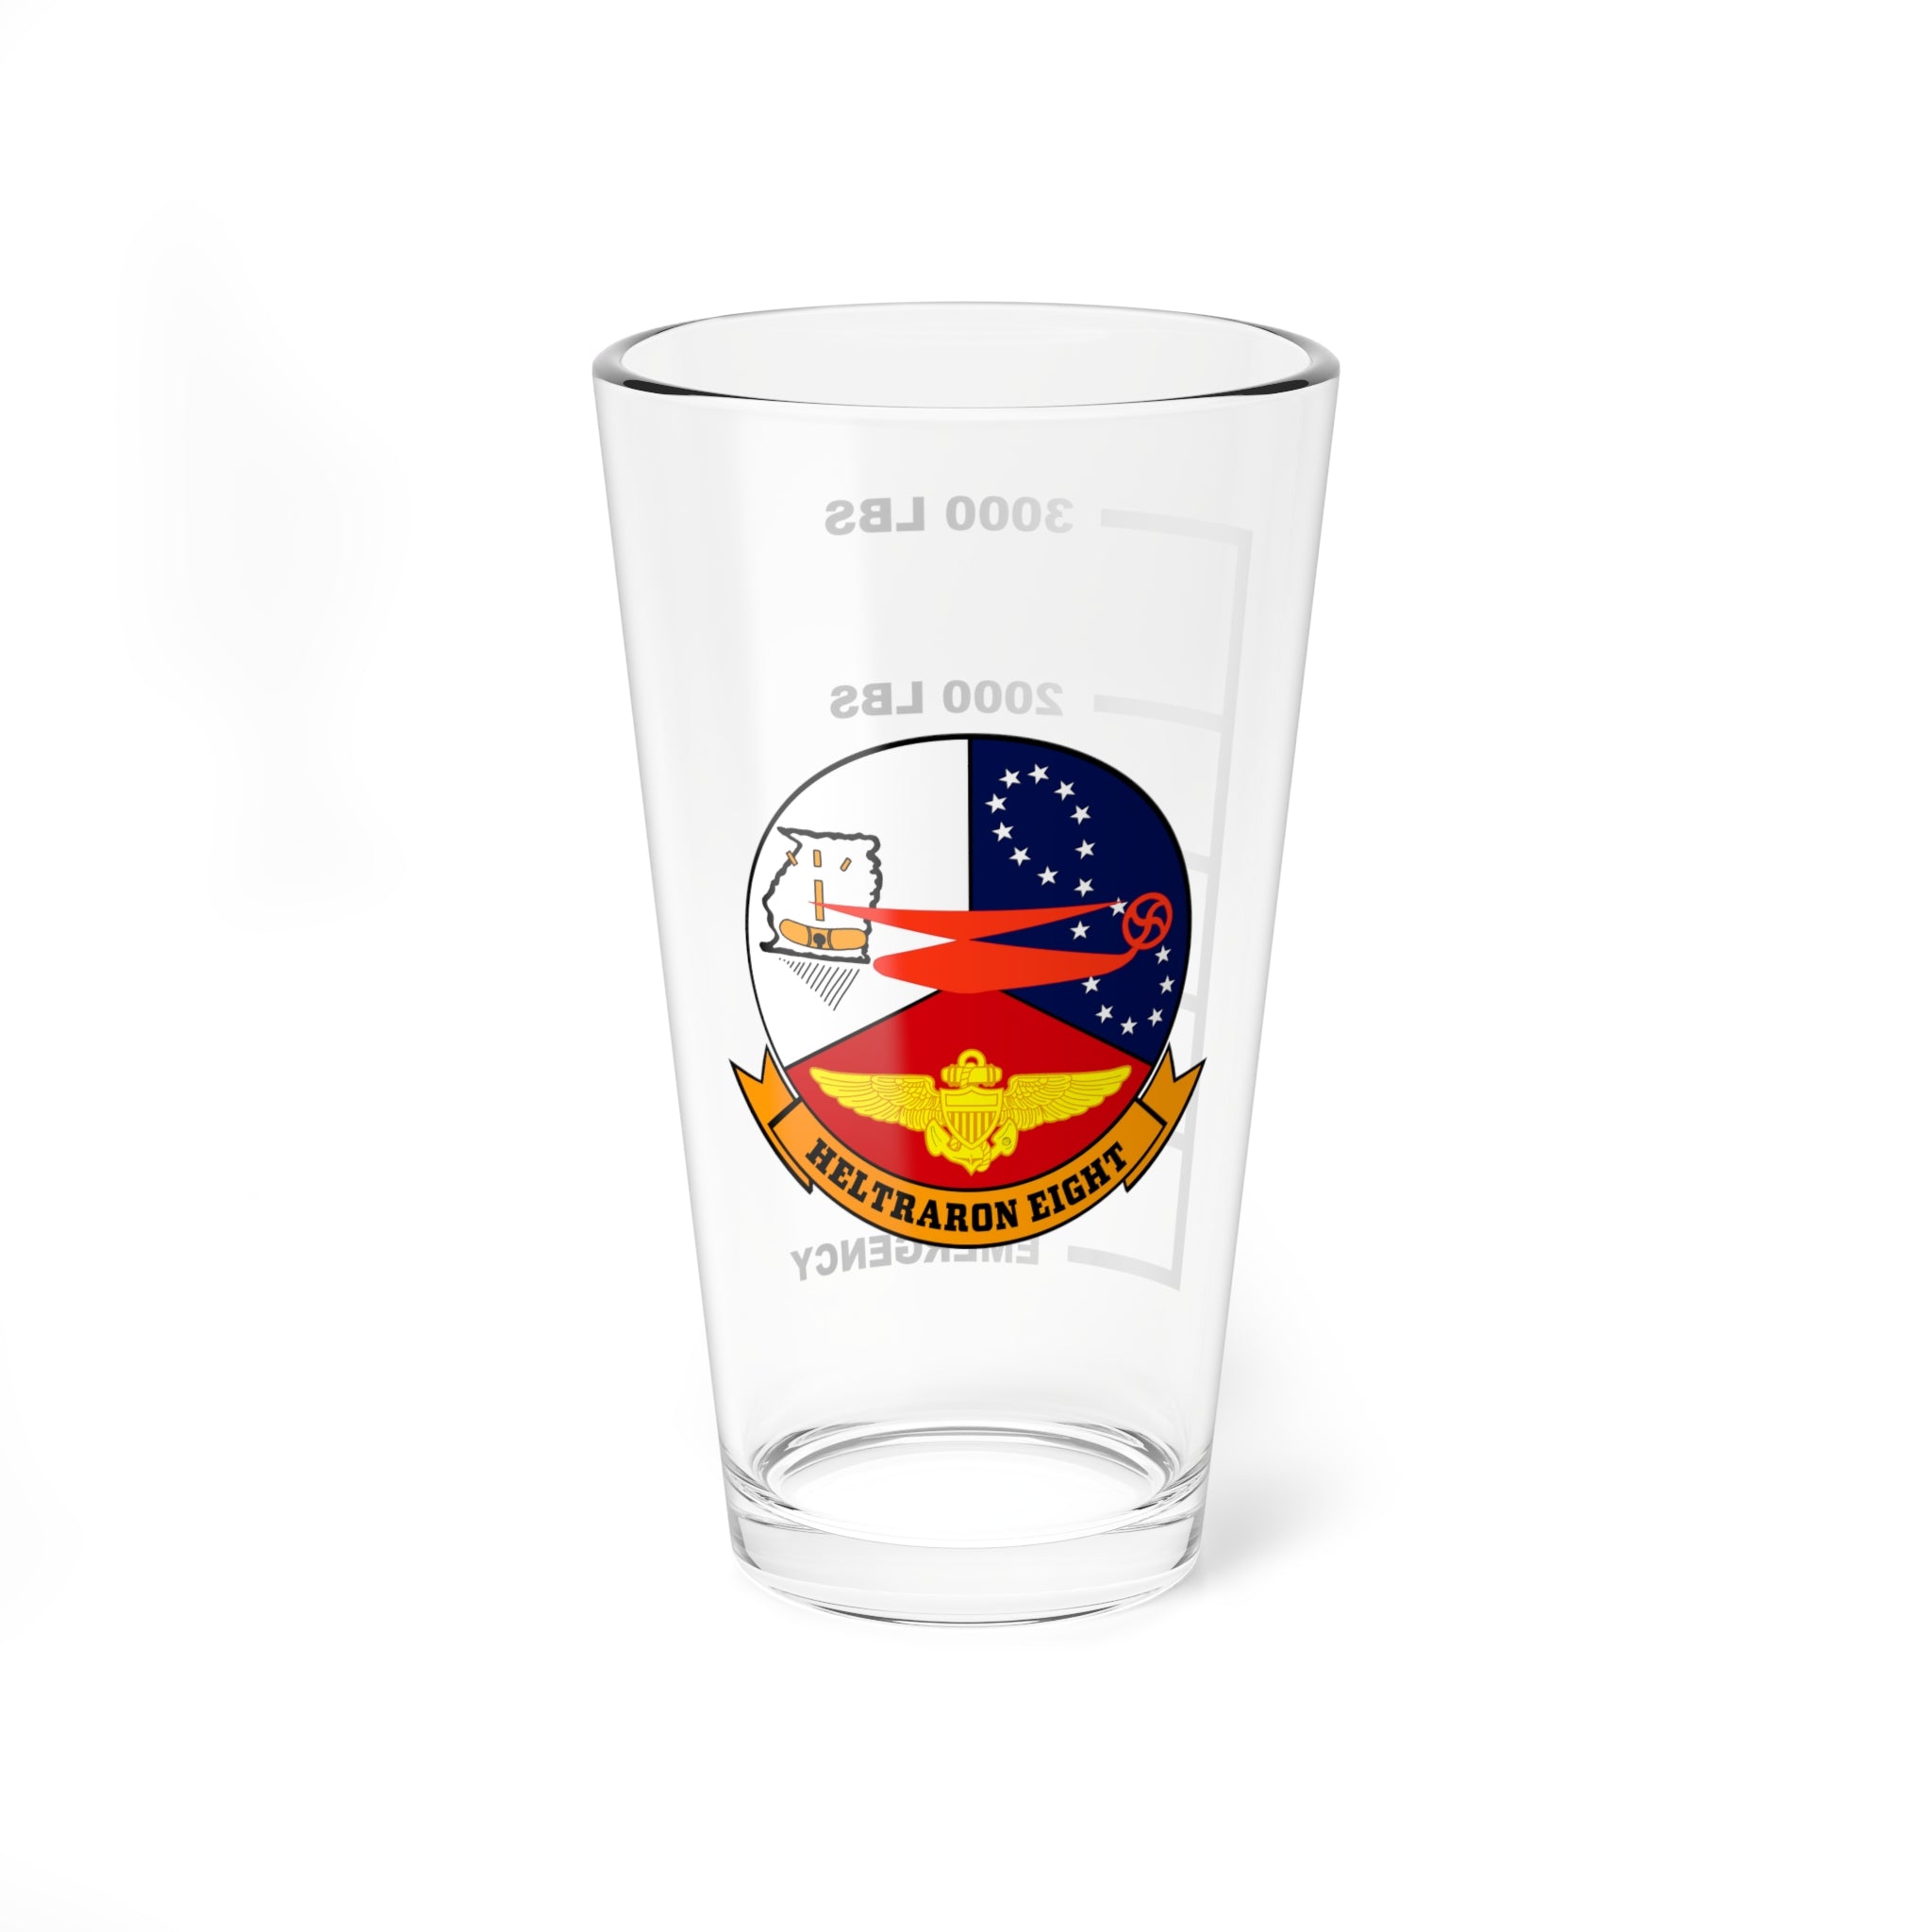 HT-8 "Eight Ballers" Fuel Low Pint Glass Mixing Glass, 16oz, Navy, Aviation, Wings, Veteran, Helicopter, H-60, HSM, HSL